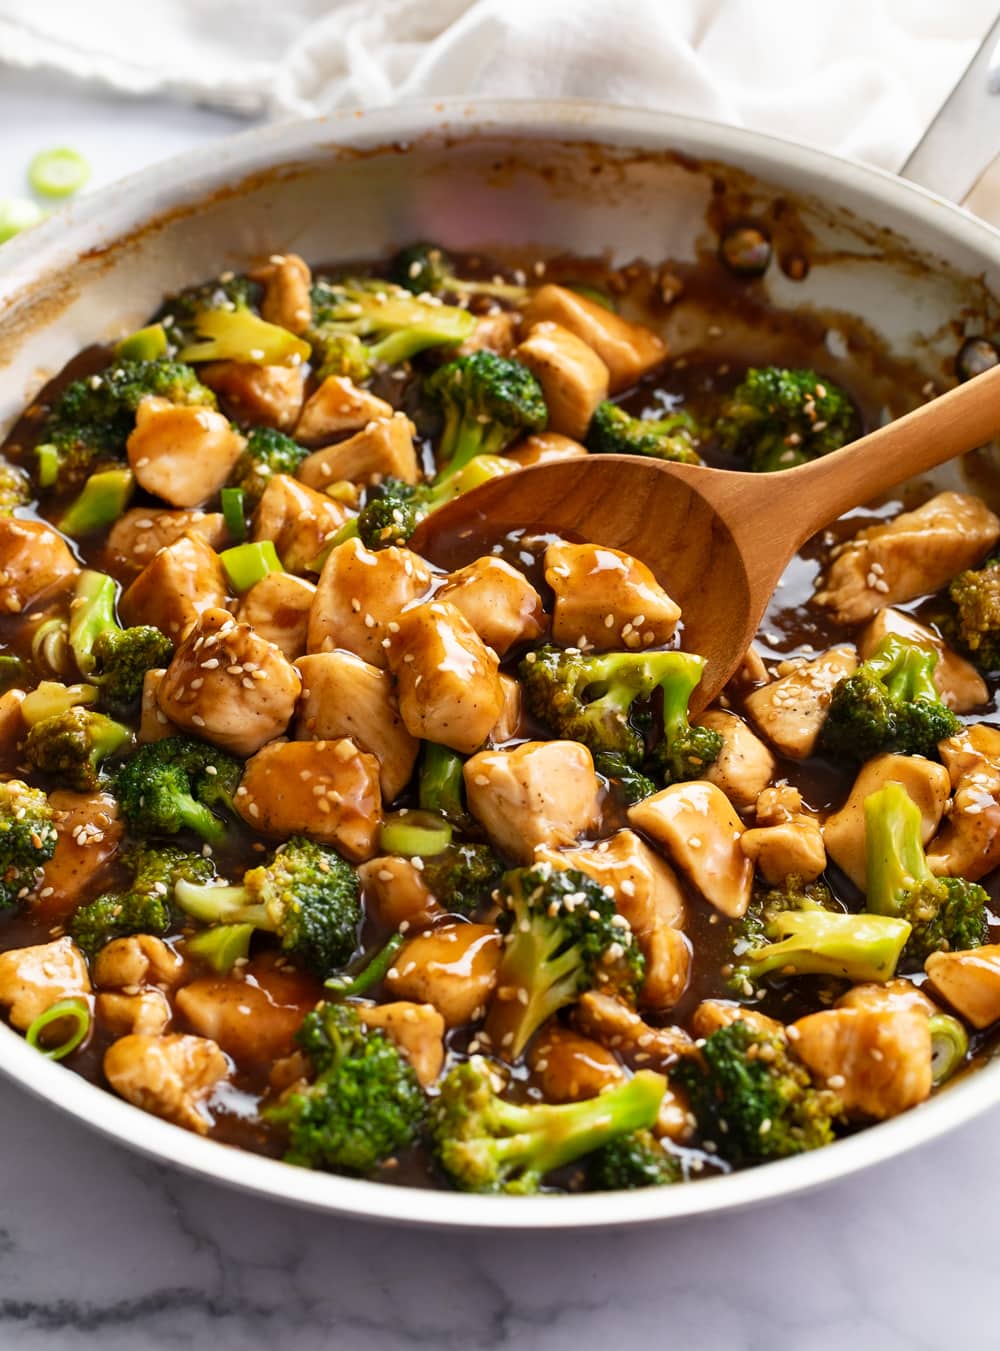 Chicken Teriyaki with broccoli in a skillet with a wooden spoon scooping it up.